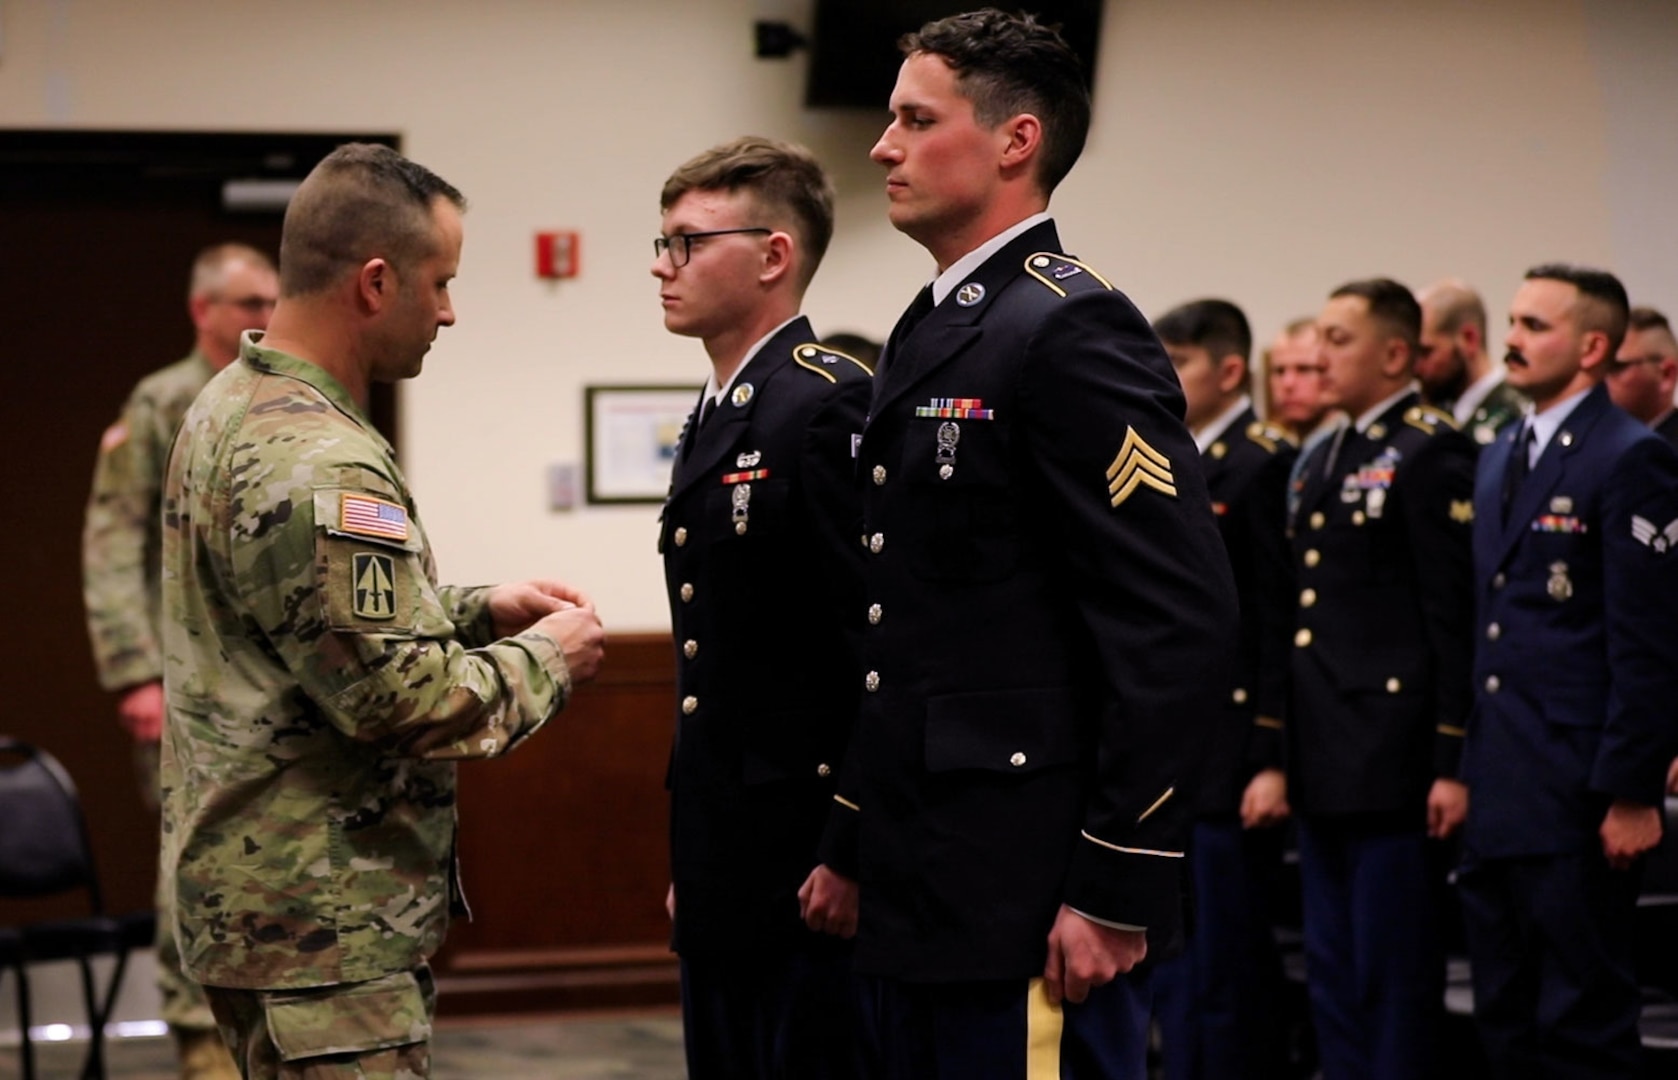 Spc. Samuel Parker, an infantryman with A Company, 2nd Battalion, 151st Infantry Regiment, Sgt. Christopher Swygart, an infantryman with A Company, 1st Battalion, 293rd Infantry Regiment, receive their awards for Best Warrior from Brig. Gen. Justin Mann, Indiana National Guard director of the joint staff, March 19, 2023, at Camp Atterbury, Ind. Parker and Swygert outperformed their peers in physically and mentally challenging tasks that tested their combat readiness.